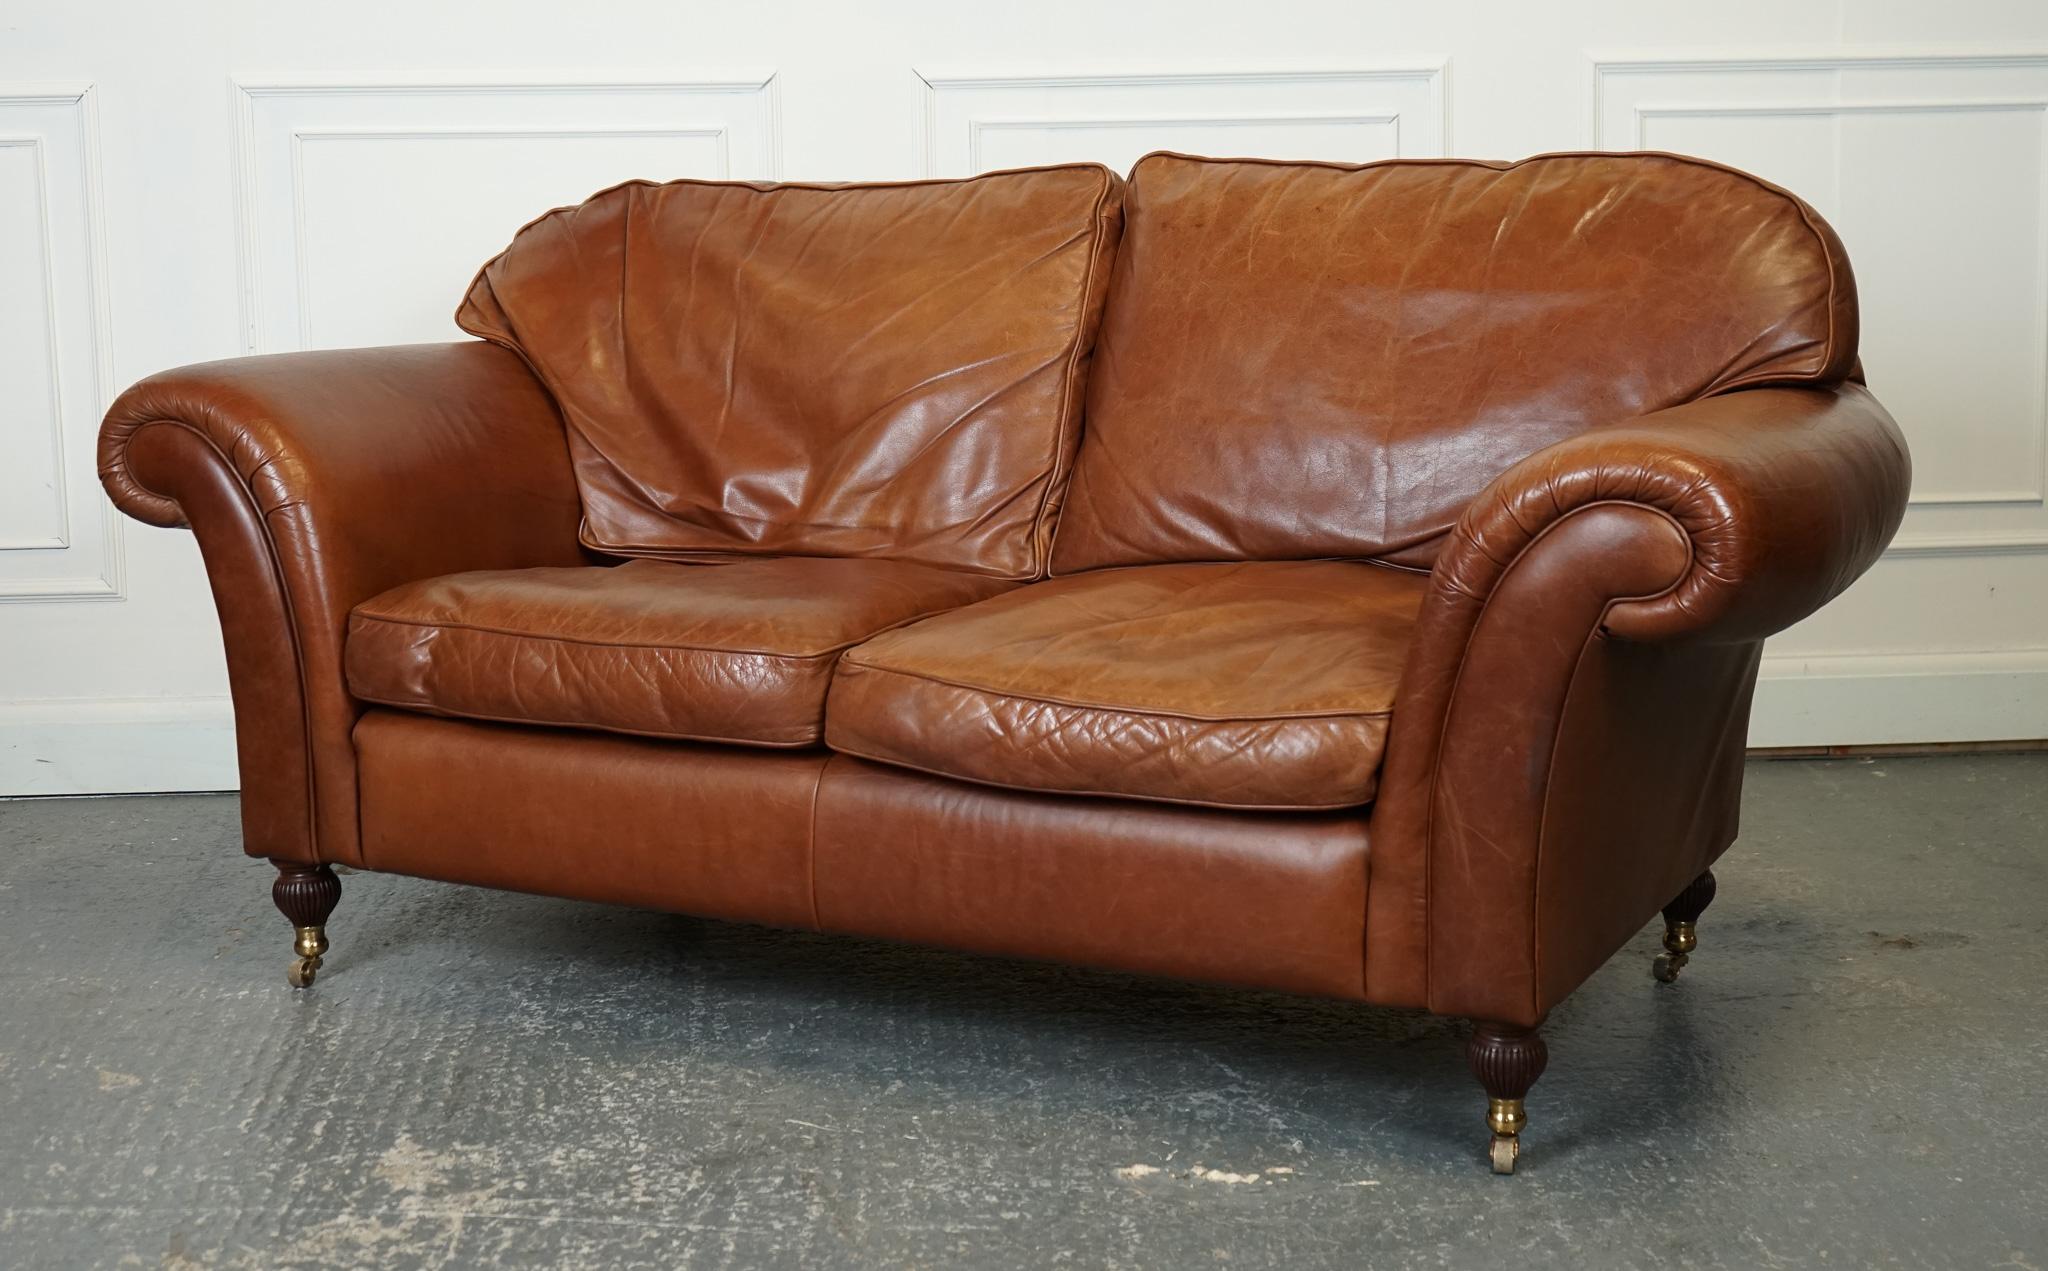 
We are delighted to offer for sale this Gorgeous Laura Ashley Mortimer Two Seater Sofa.

The stunning Laura Ashley Mortimer Medium Brown Leather Sofa is a true statement piece for any living room. Raised on castors, the sofa exudes an air of